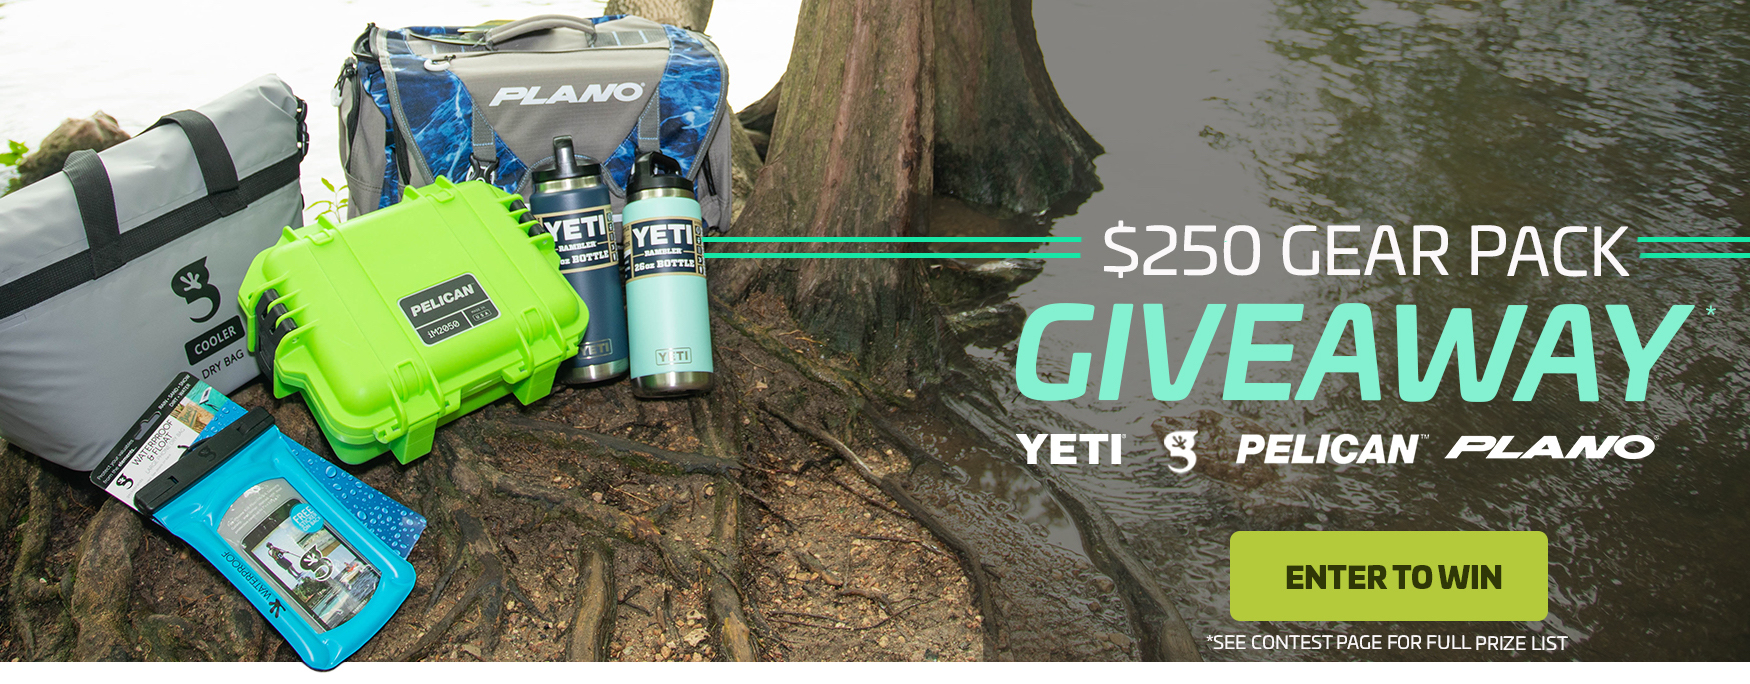 $250 GEAR GIVEAWAY PACKAGE